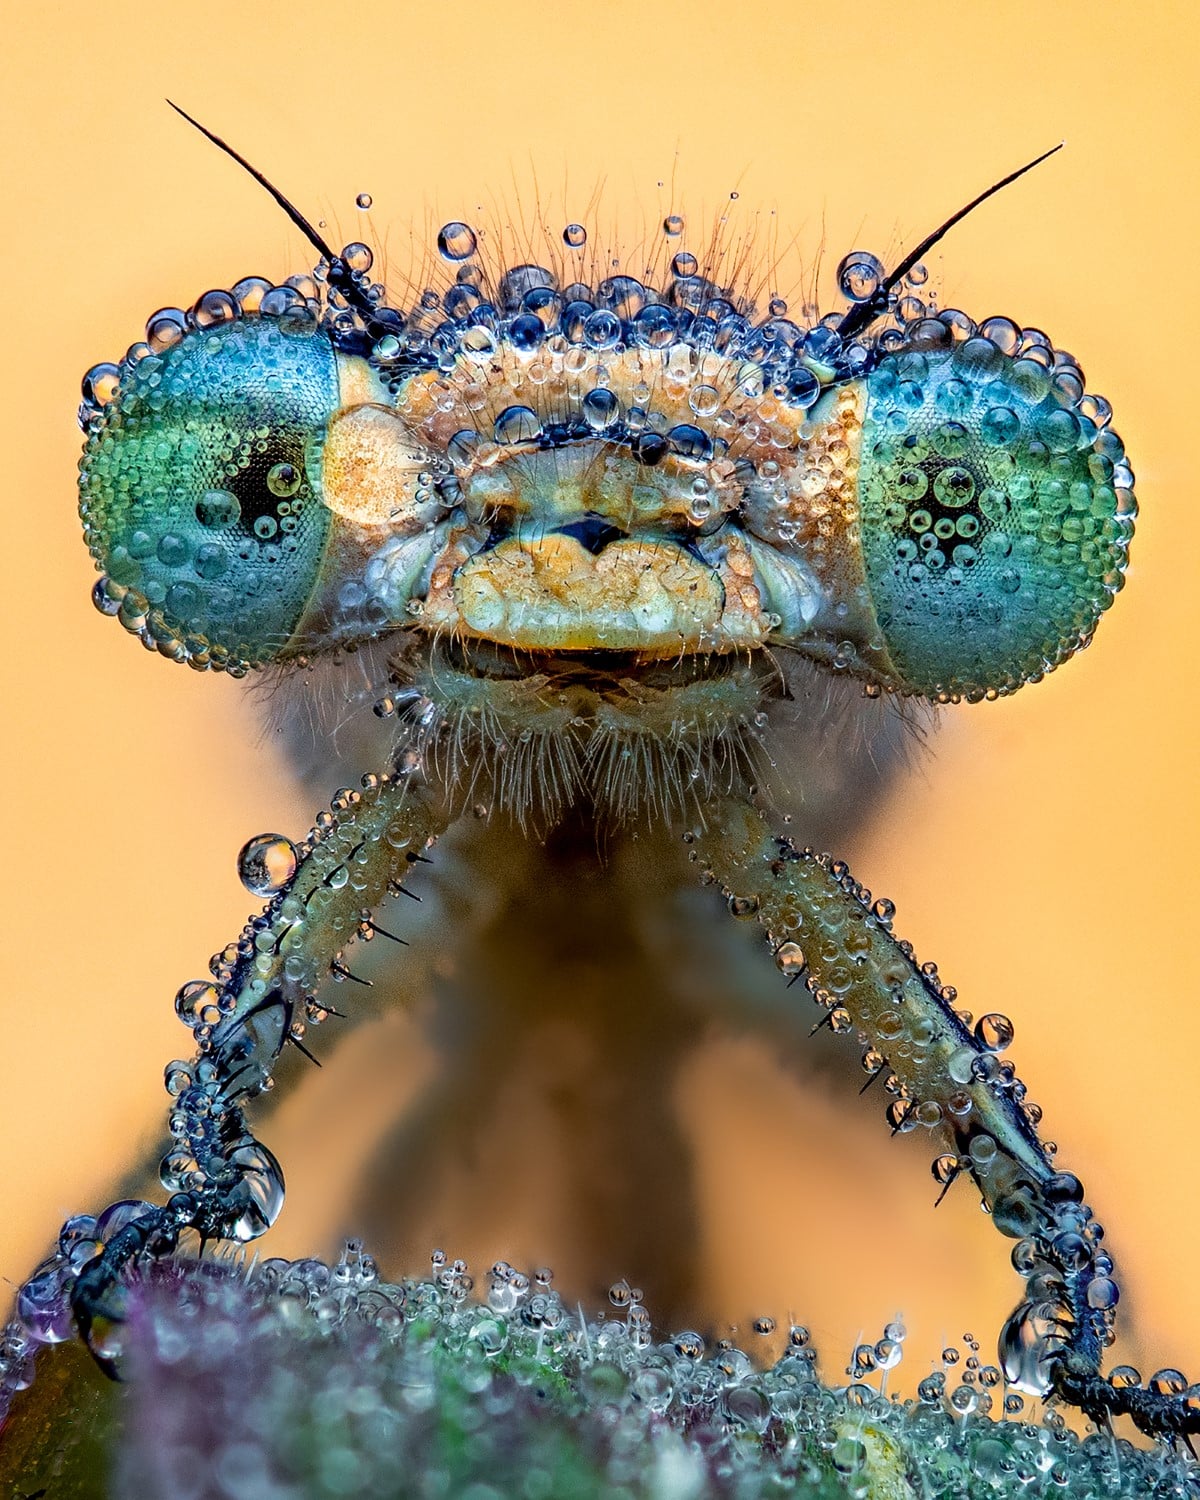 Damselfly covered in dew